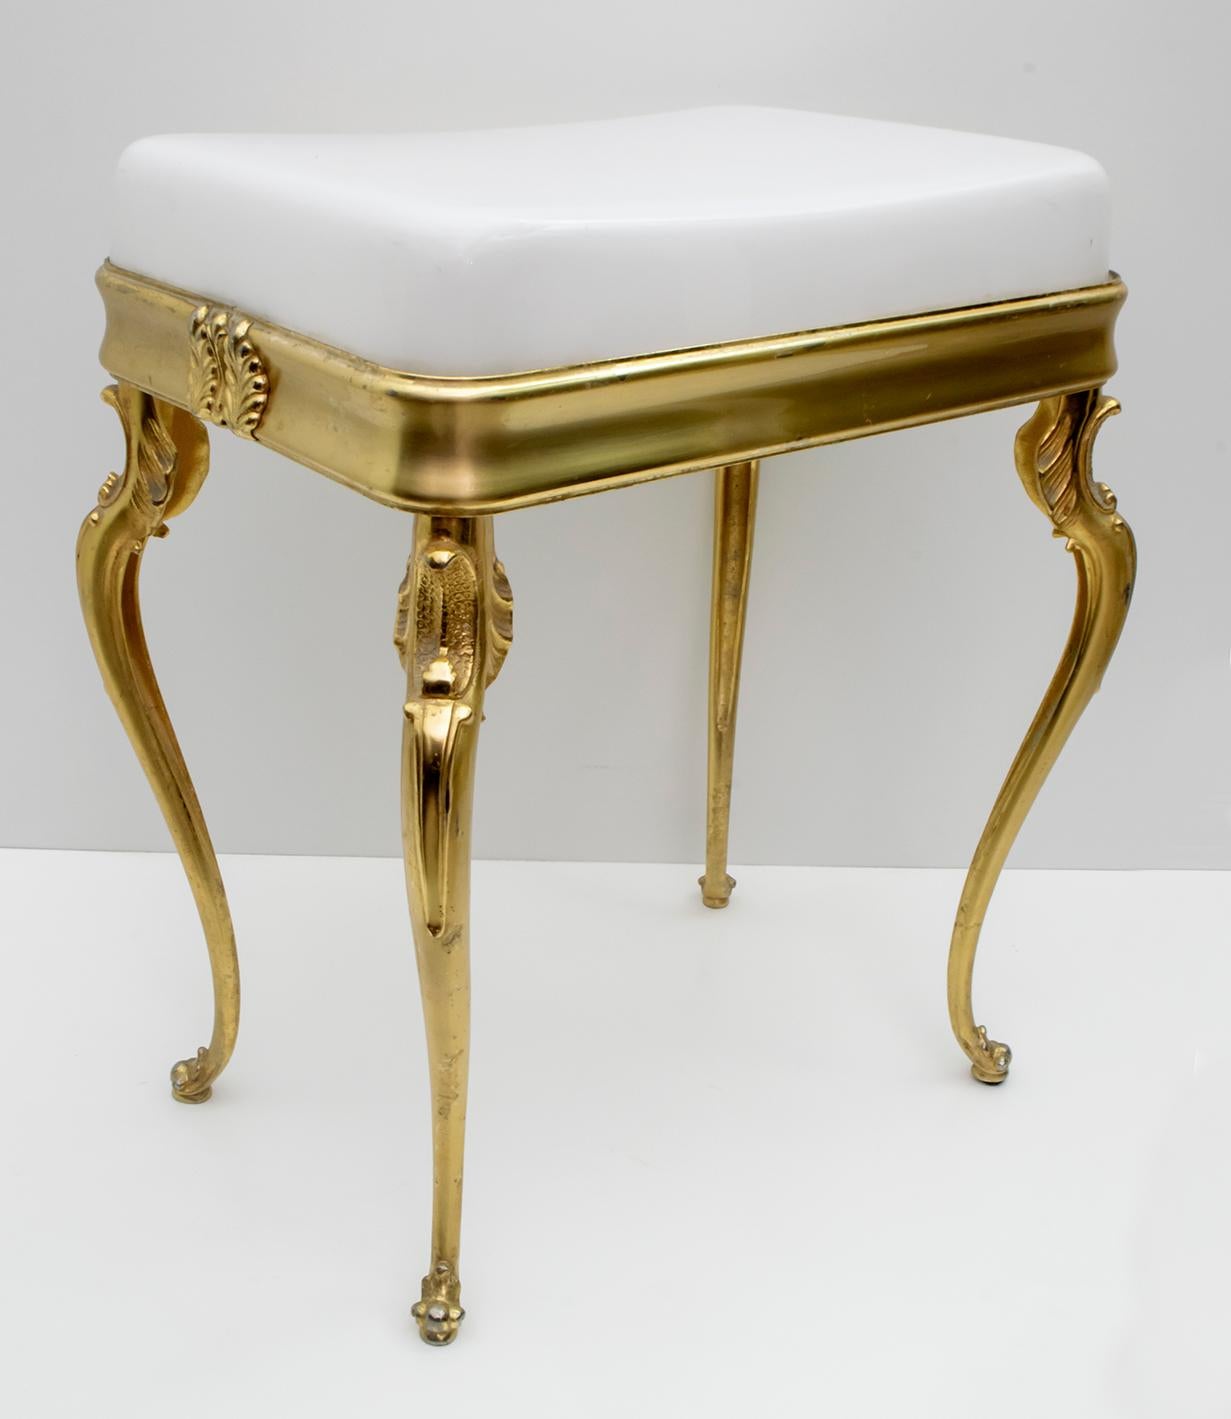 This Italian stool dates back to the 1950s and is made of solid brass and white plexiglass.